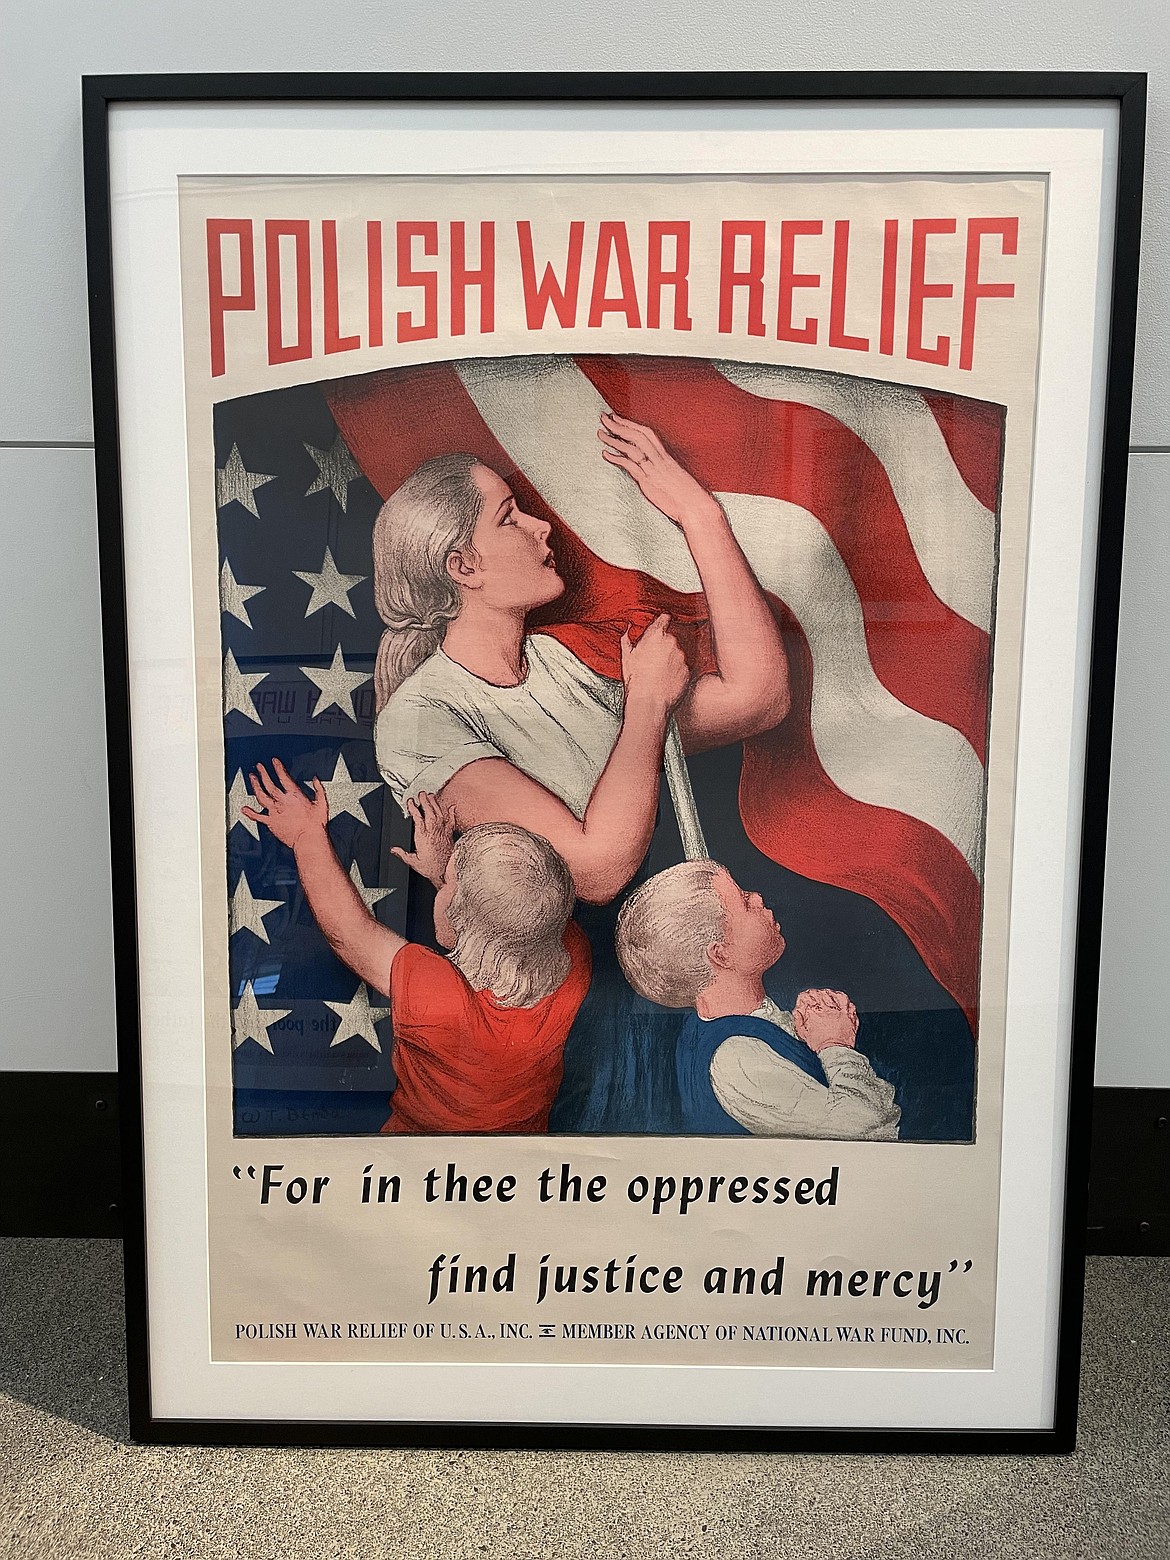 A poster soliciting aid for Polish war relief. Poland was invaded by Nazi Germany in September of 1939.